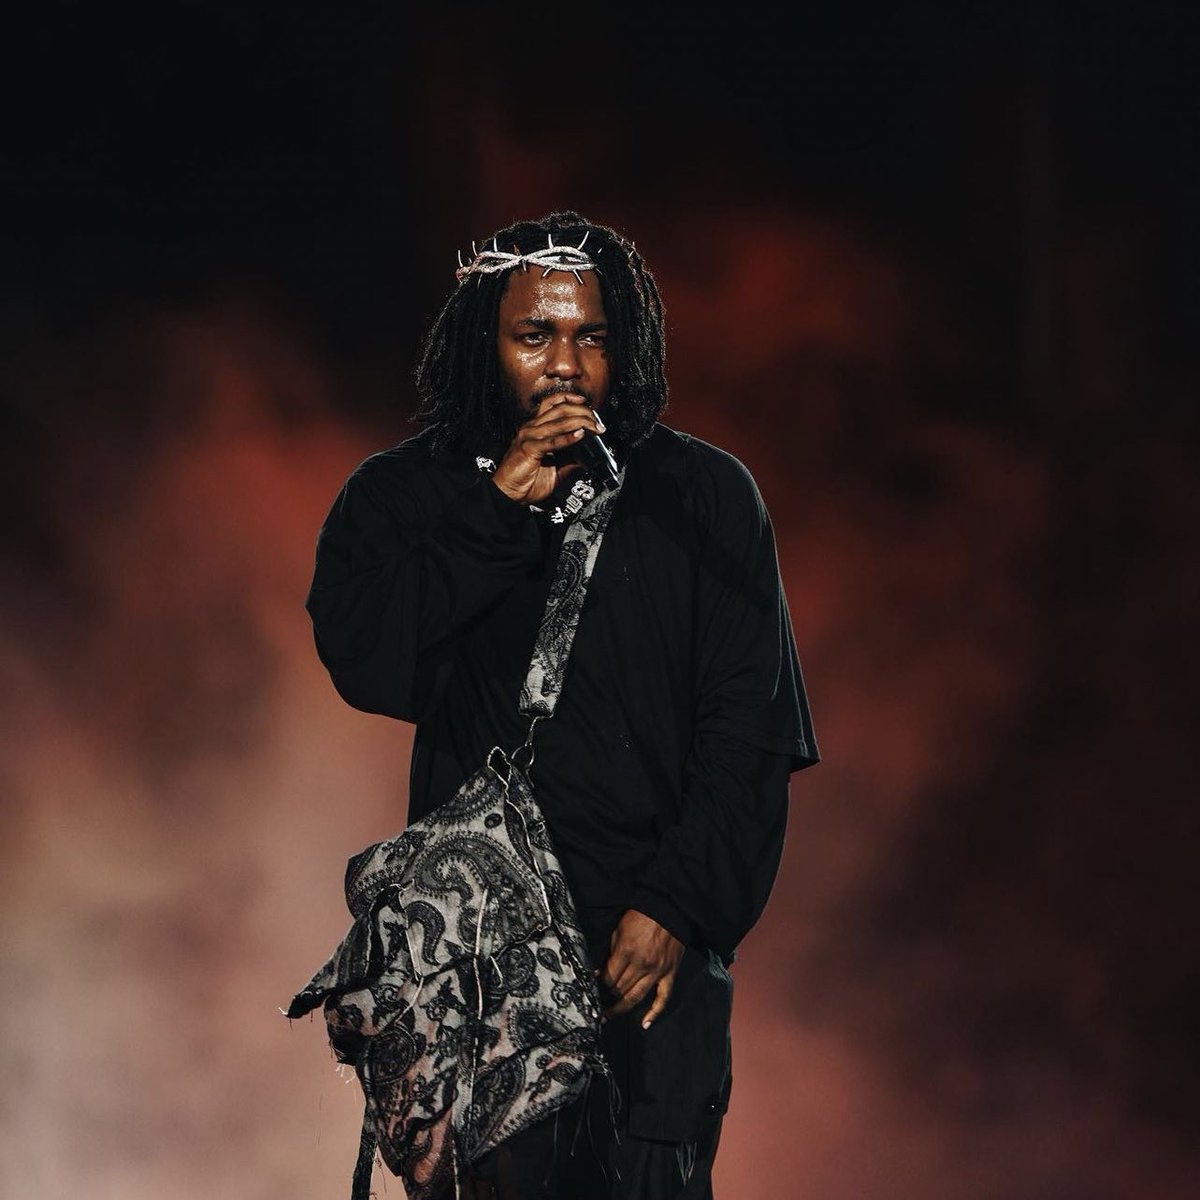 Kendrick Lamar on “Not Like Us”

“Rabbit hole is still deep I can go farther I promise”